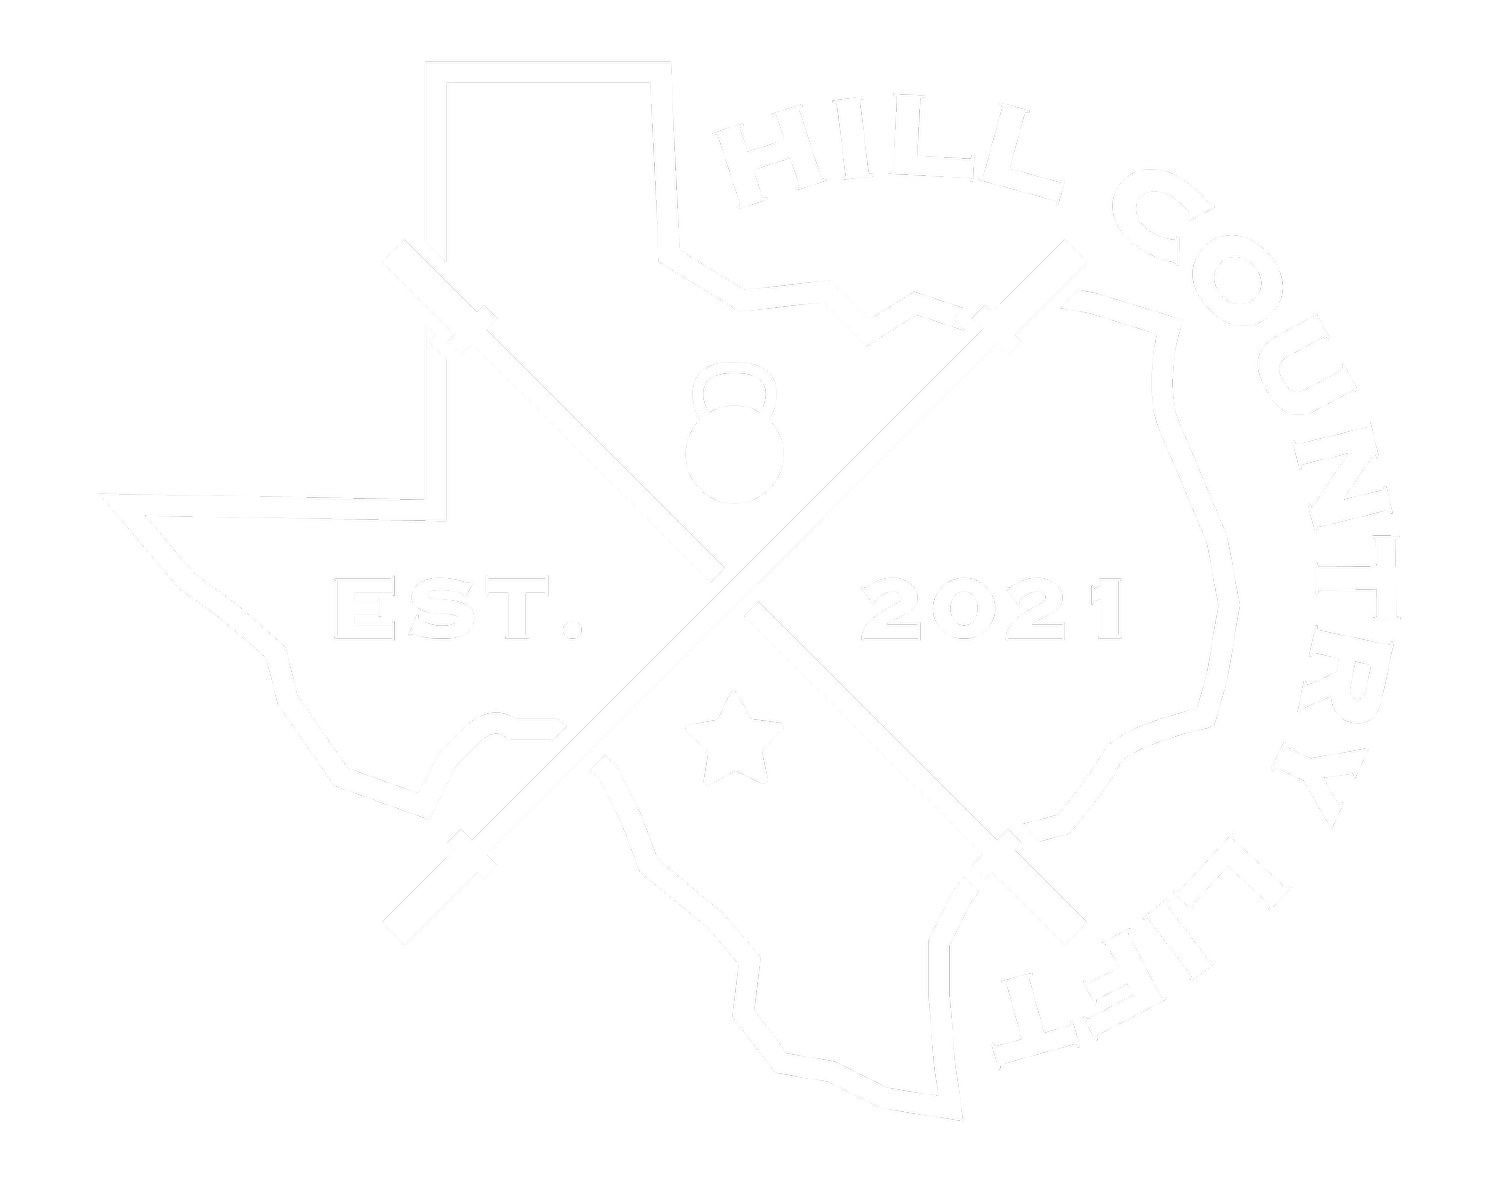 Hill Country L.I.F.T.